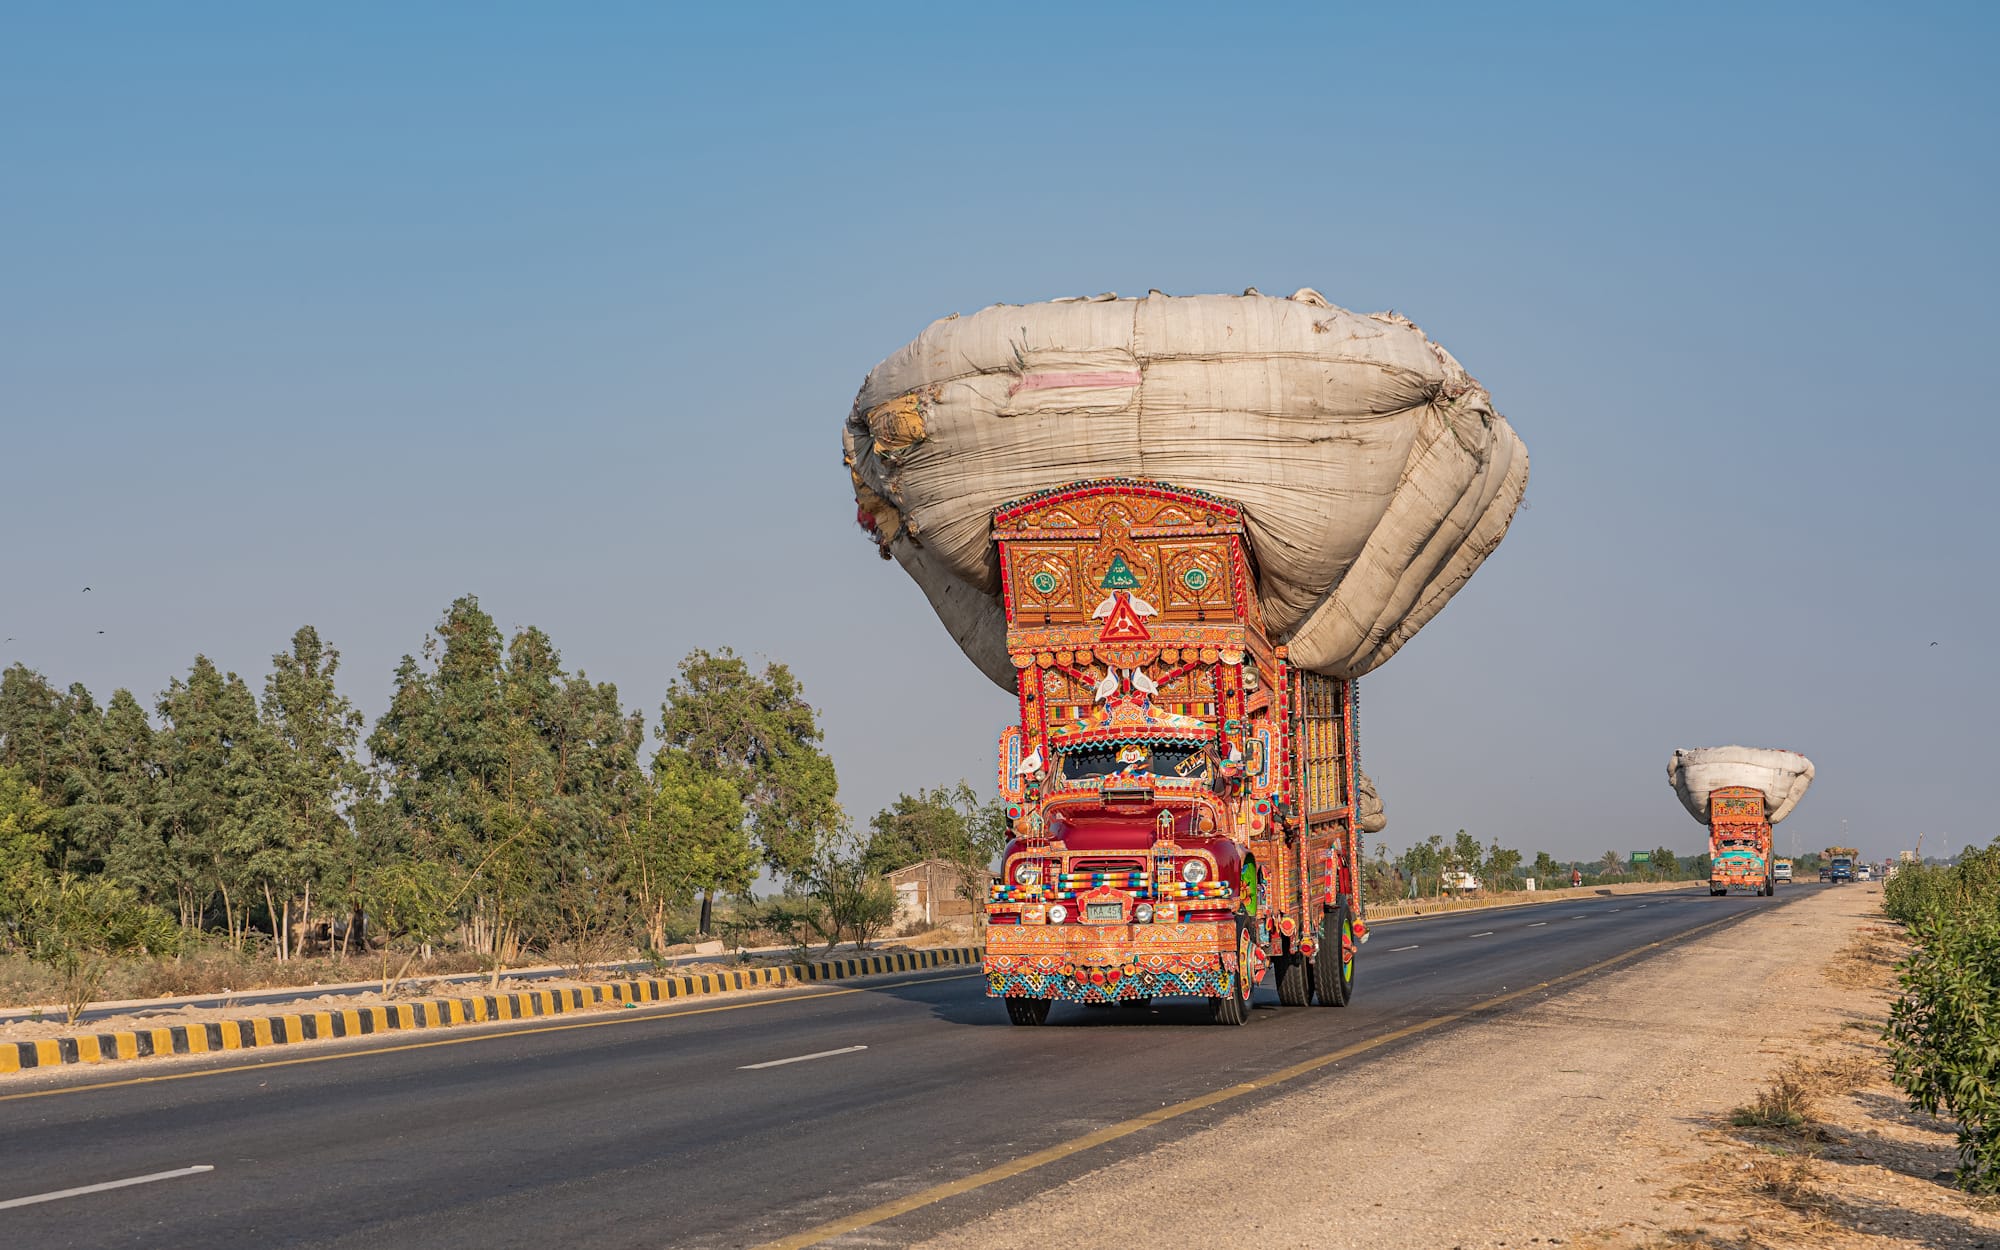 Flamboyantly decorated truck carrying an enormous load as it makes its way along a road followed by a similarly decorated truck behind.